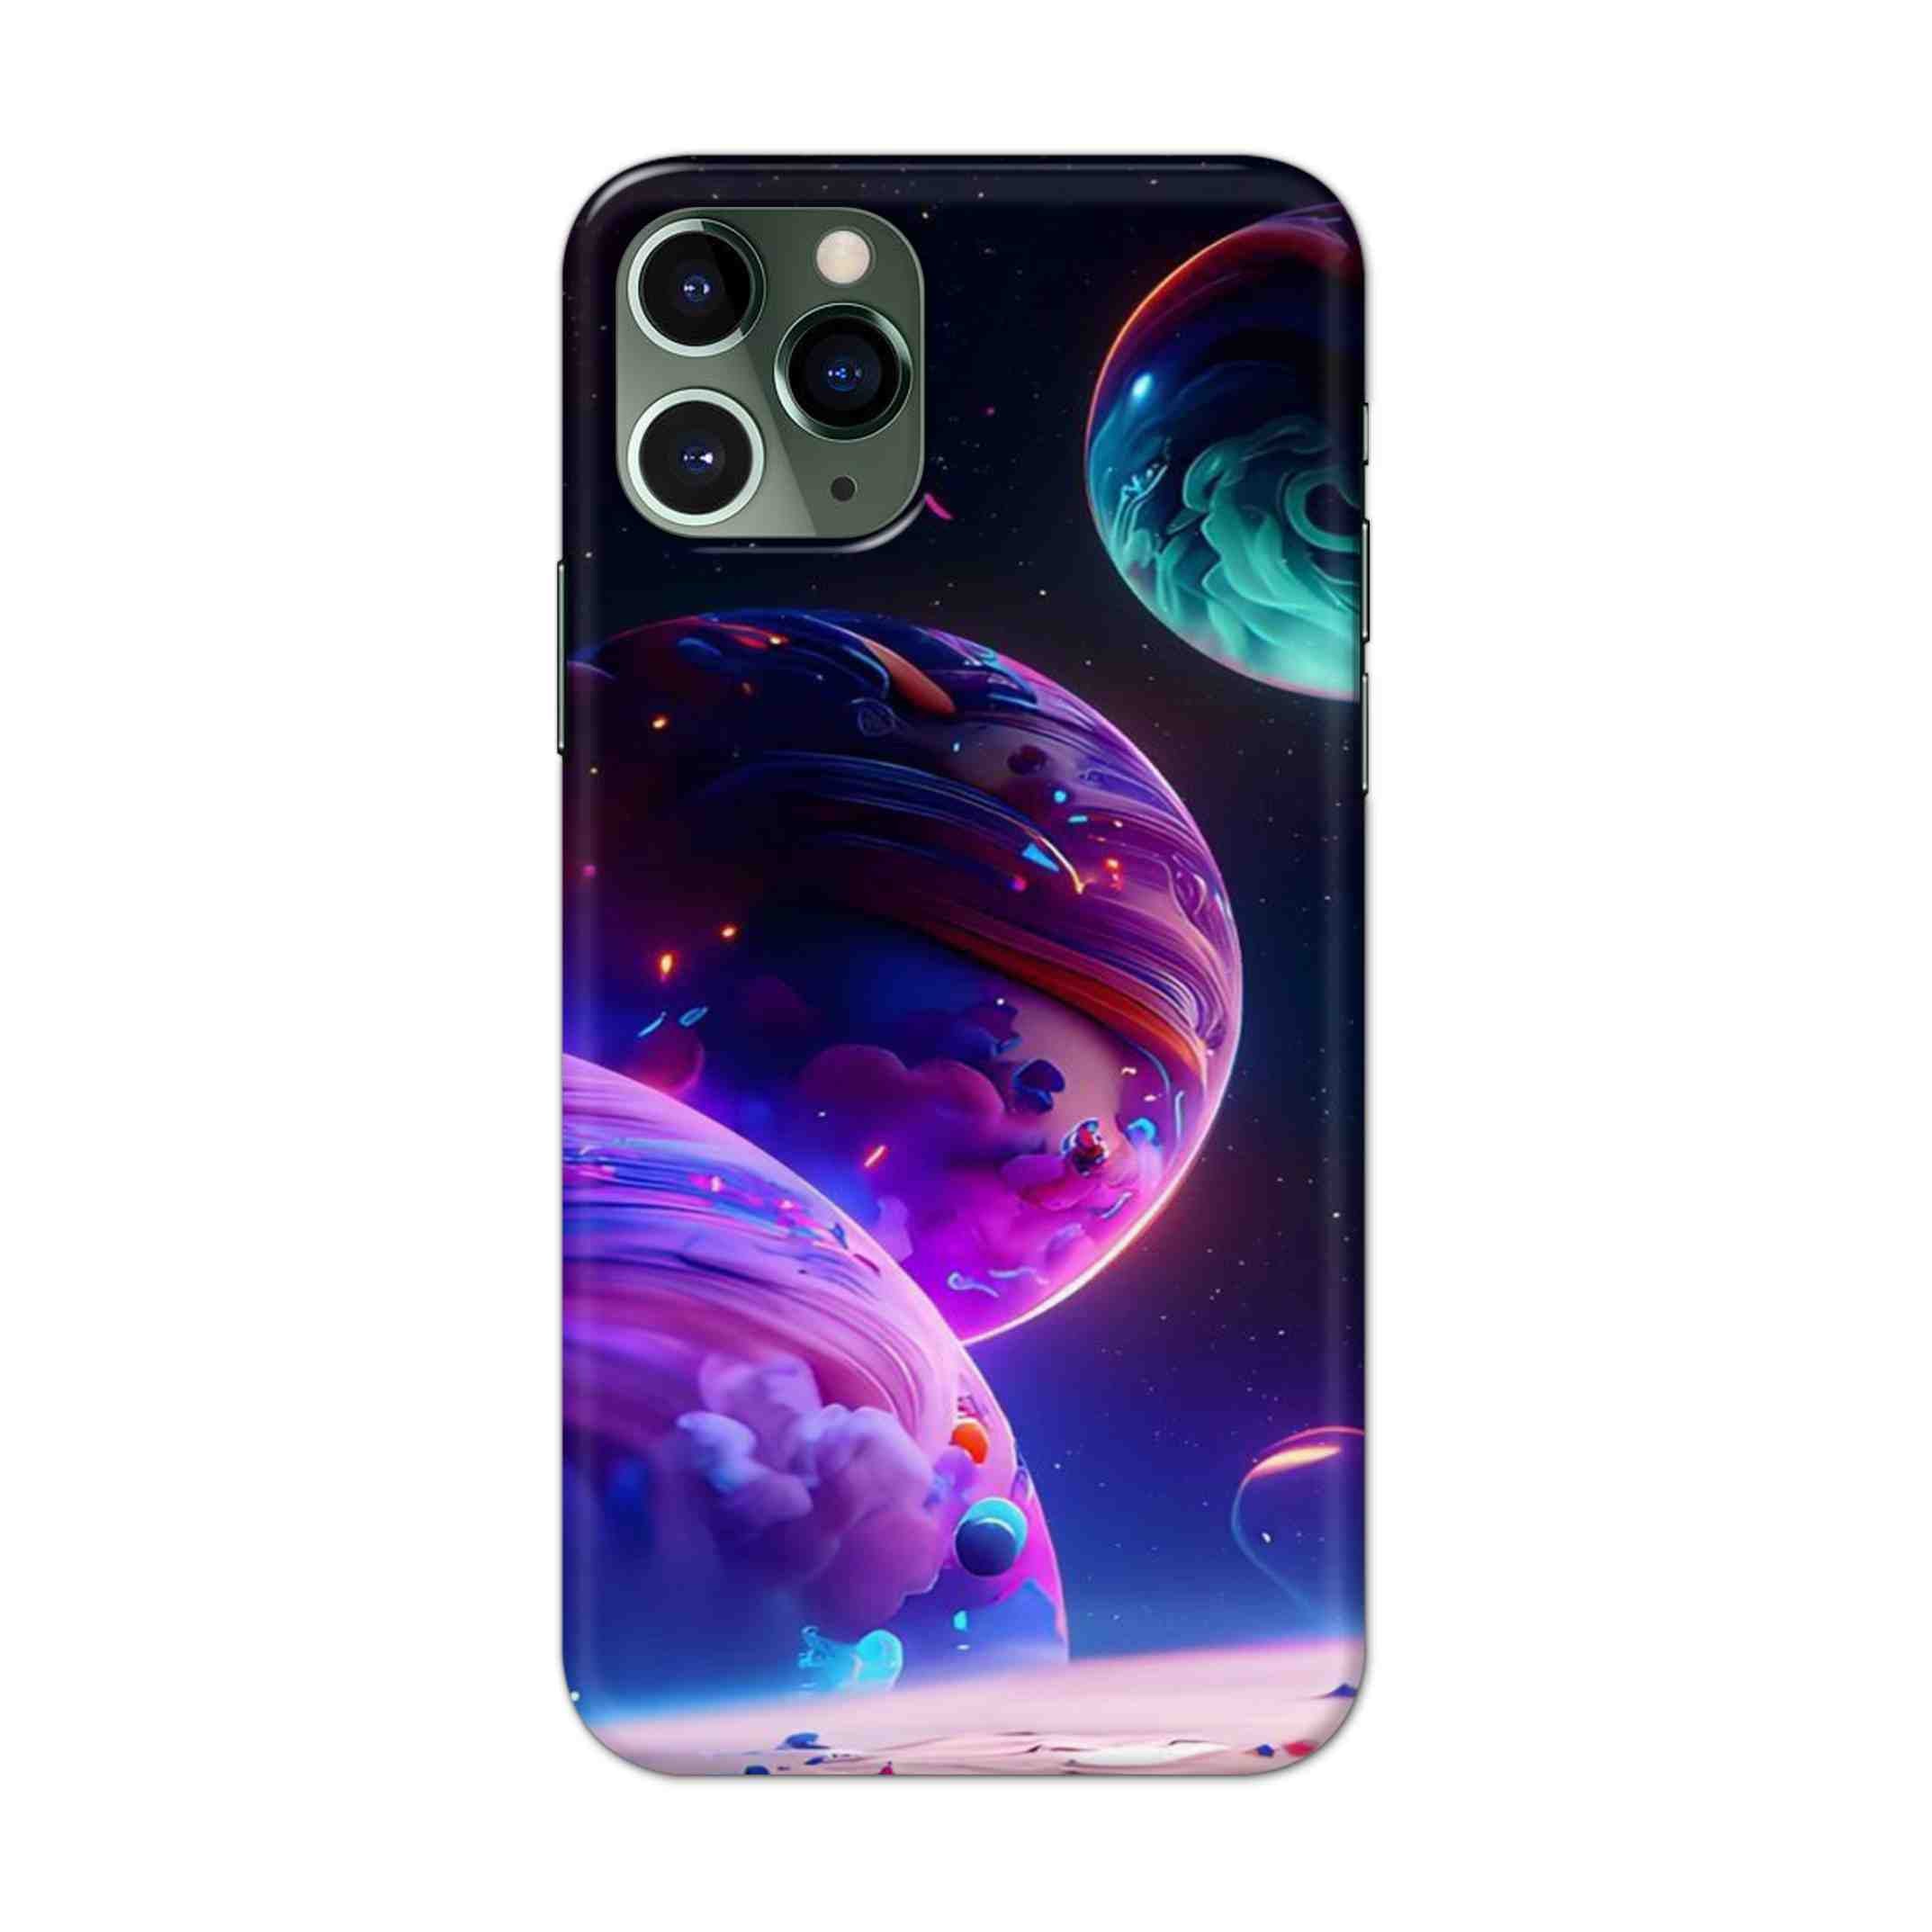 Buy 3 Earth Hard Back Mobile Phone Case/Cover For iPhone 11 Pro Online